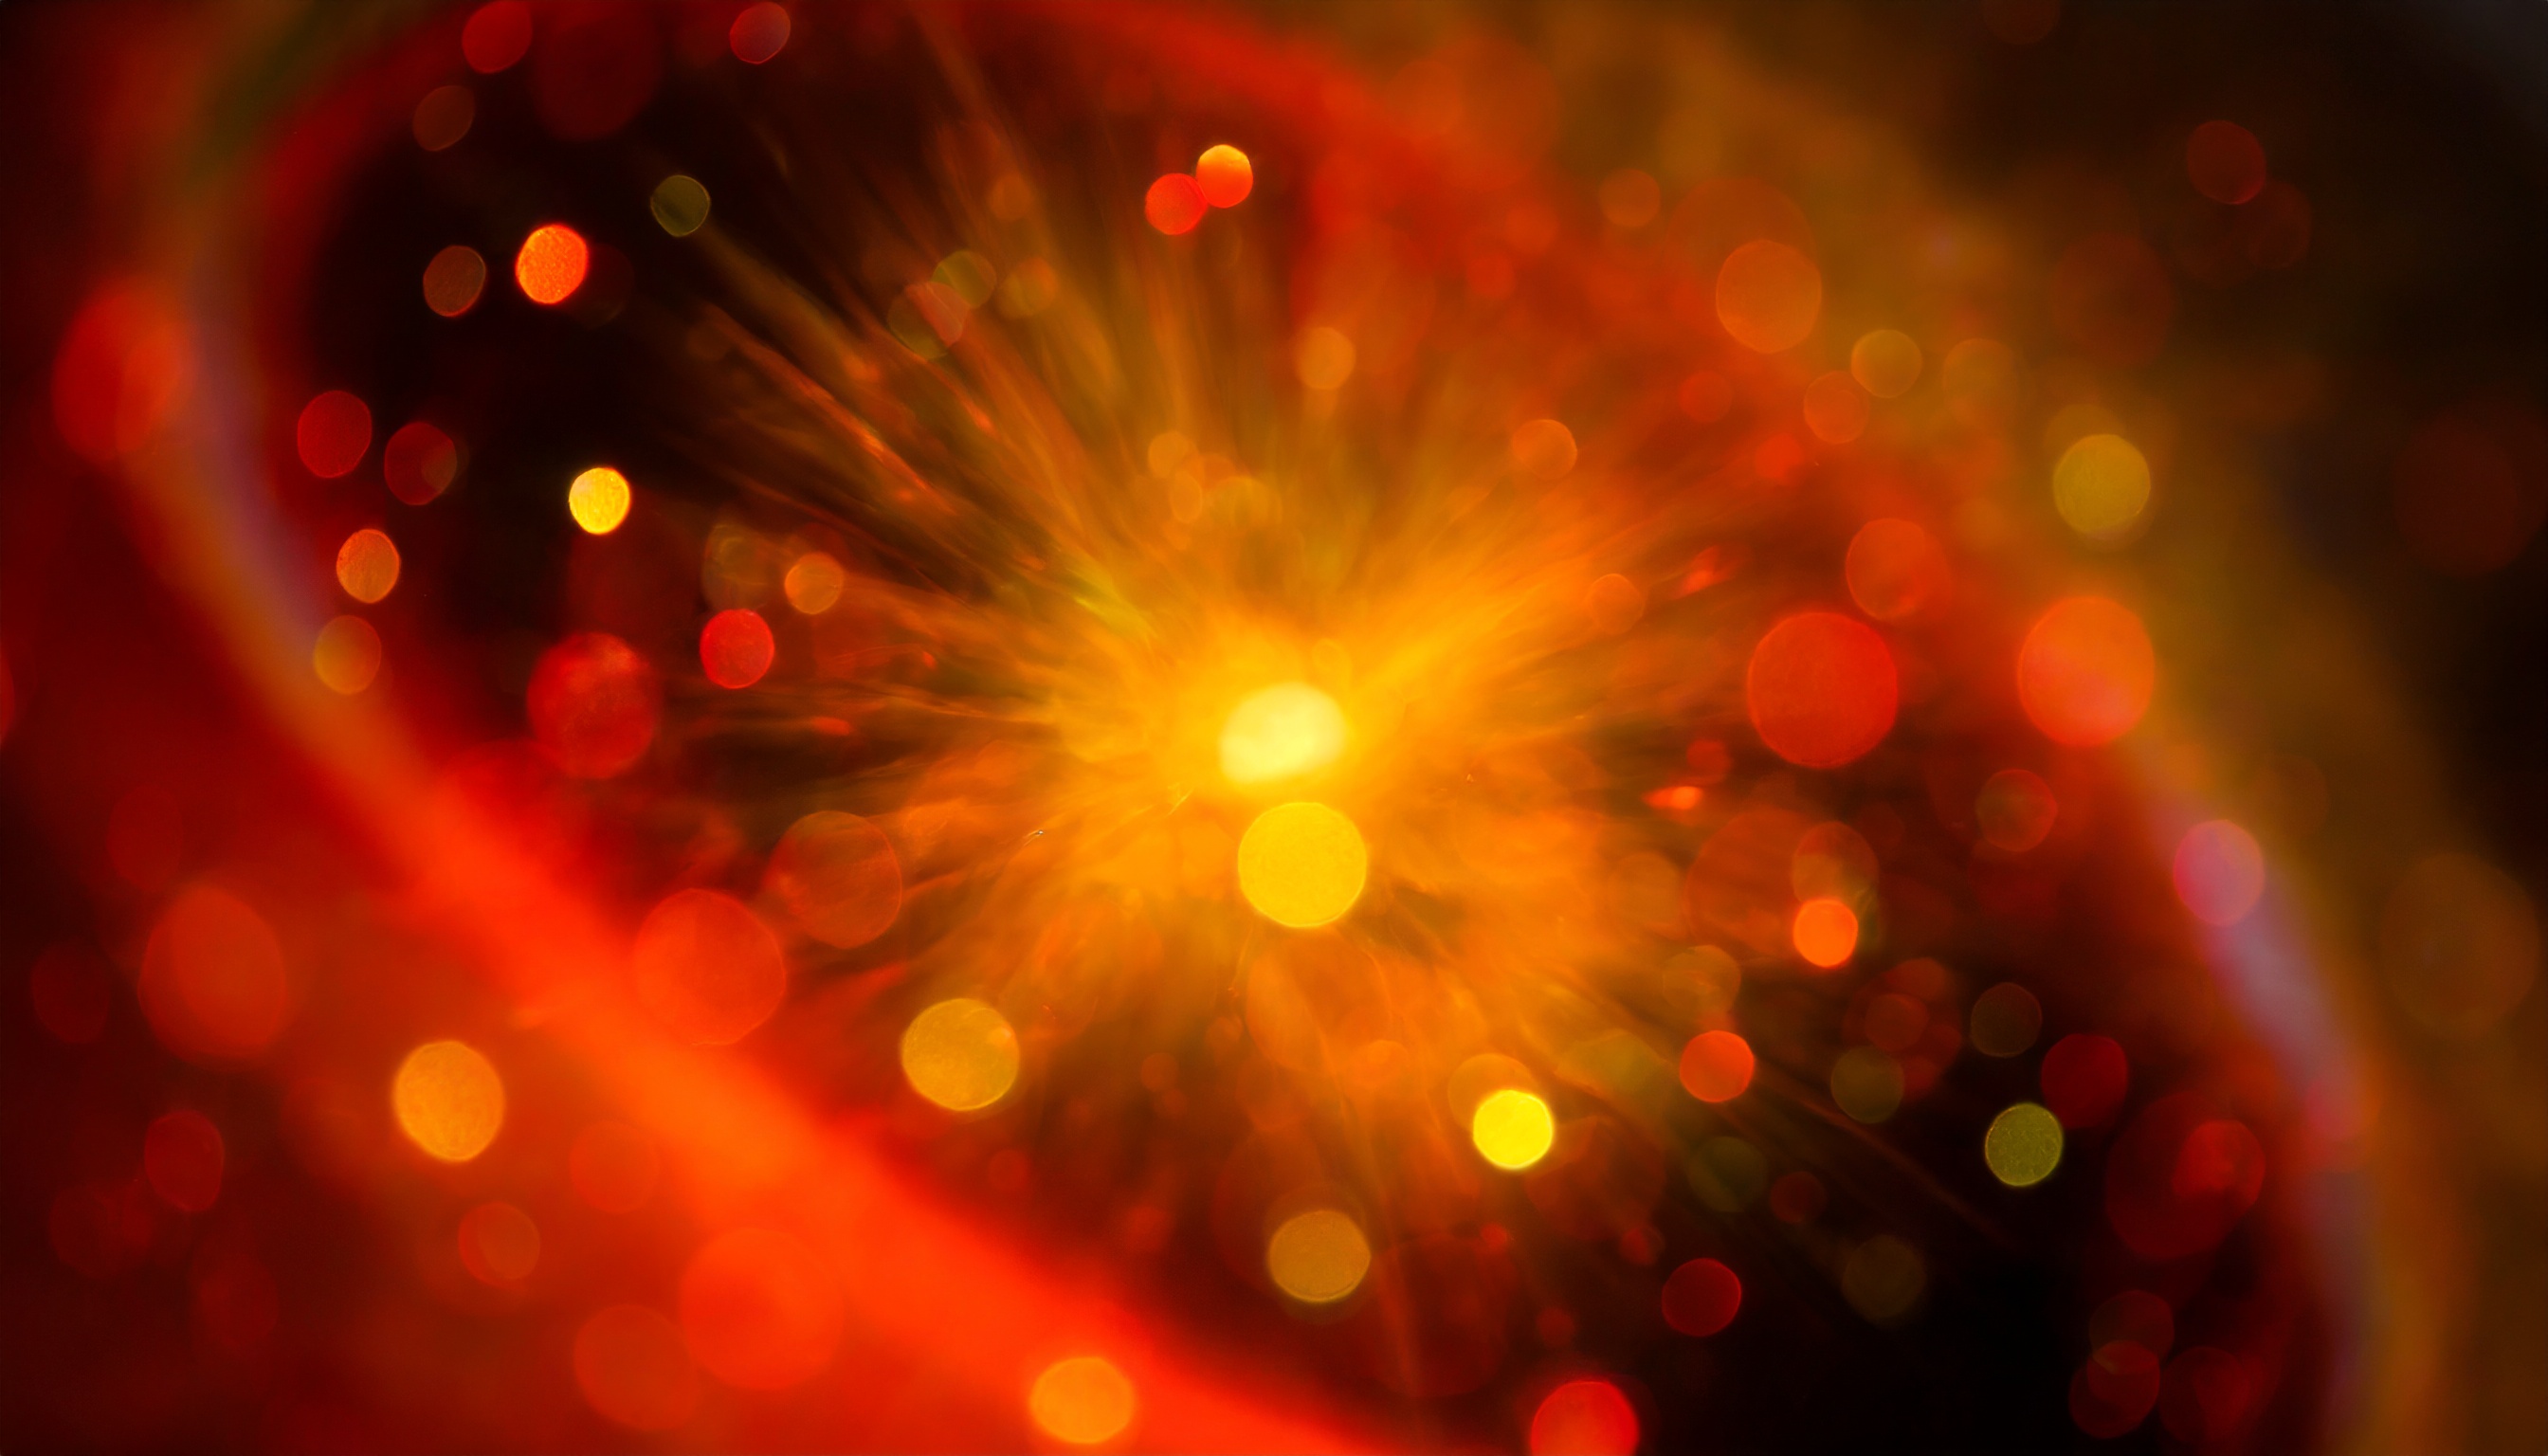 General 2688x1536 AI art digital art particle explosion Explosions in the Sky collision orange blurred blurry background